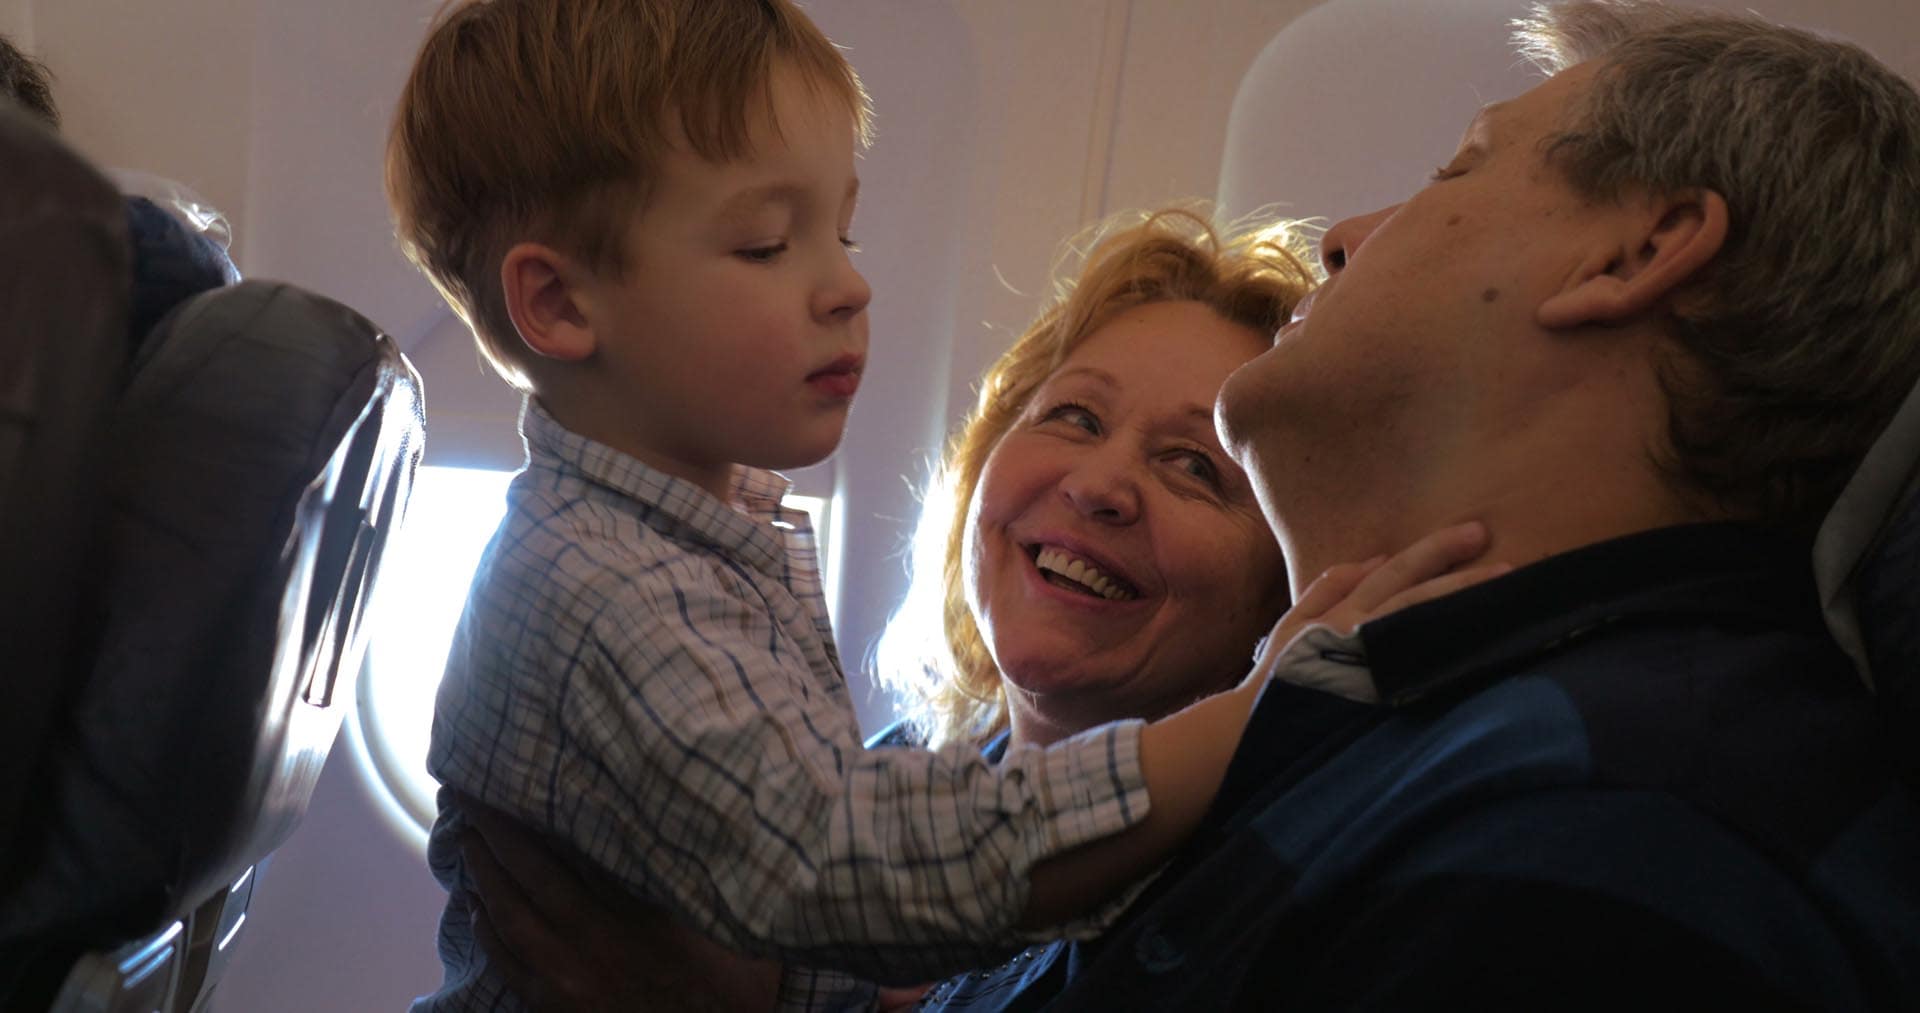 Traveling By Air With Your Autistic Child